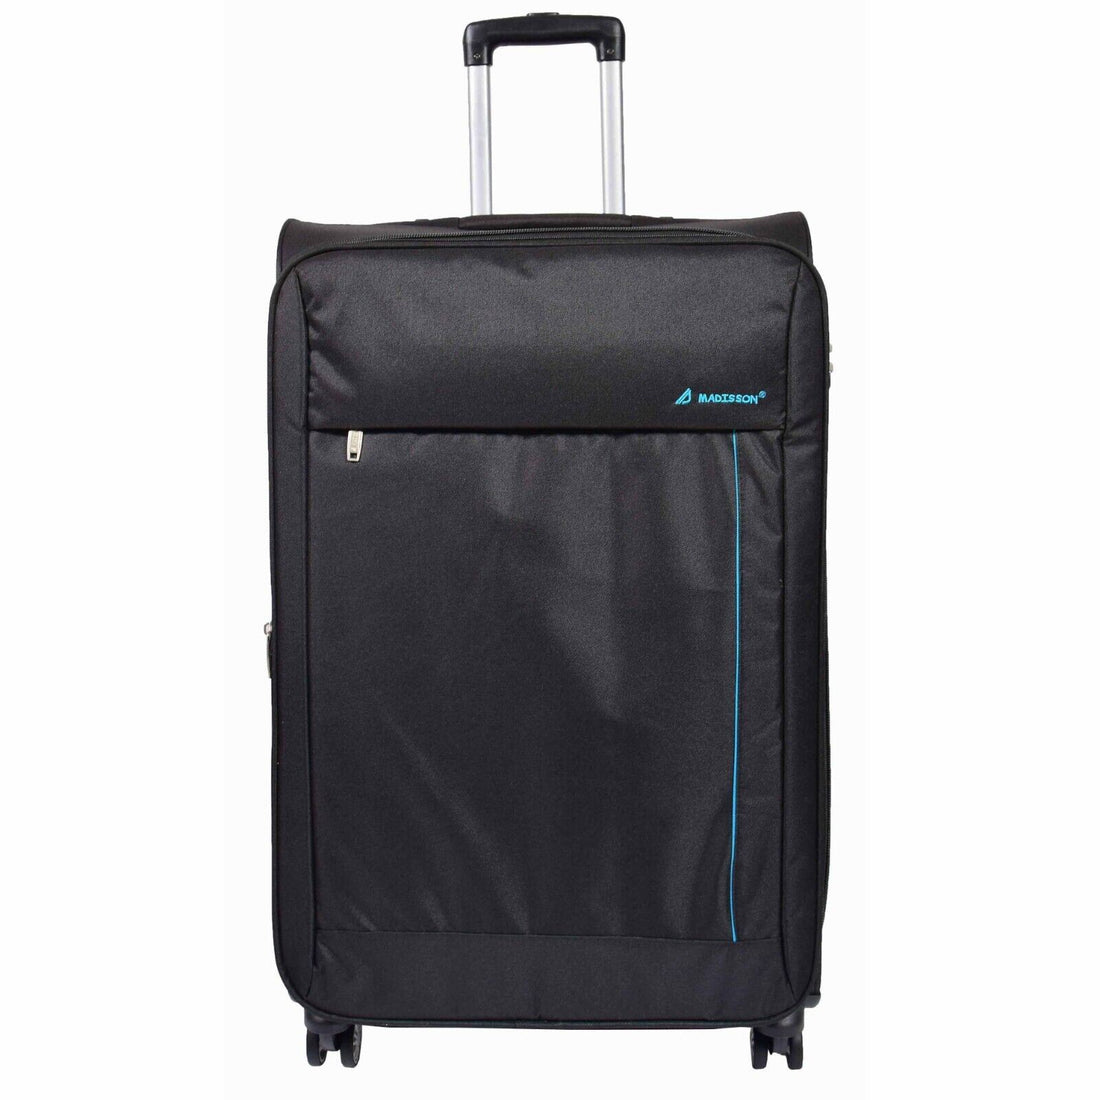 Carrollton Large Soft Shell Suitcase in Black